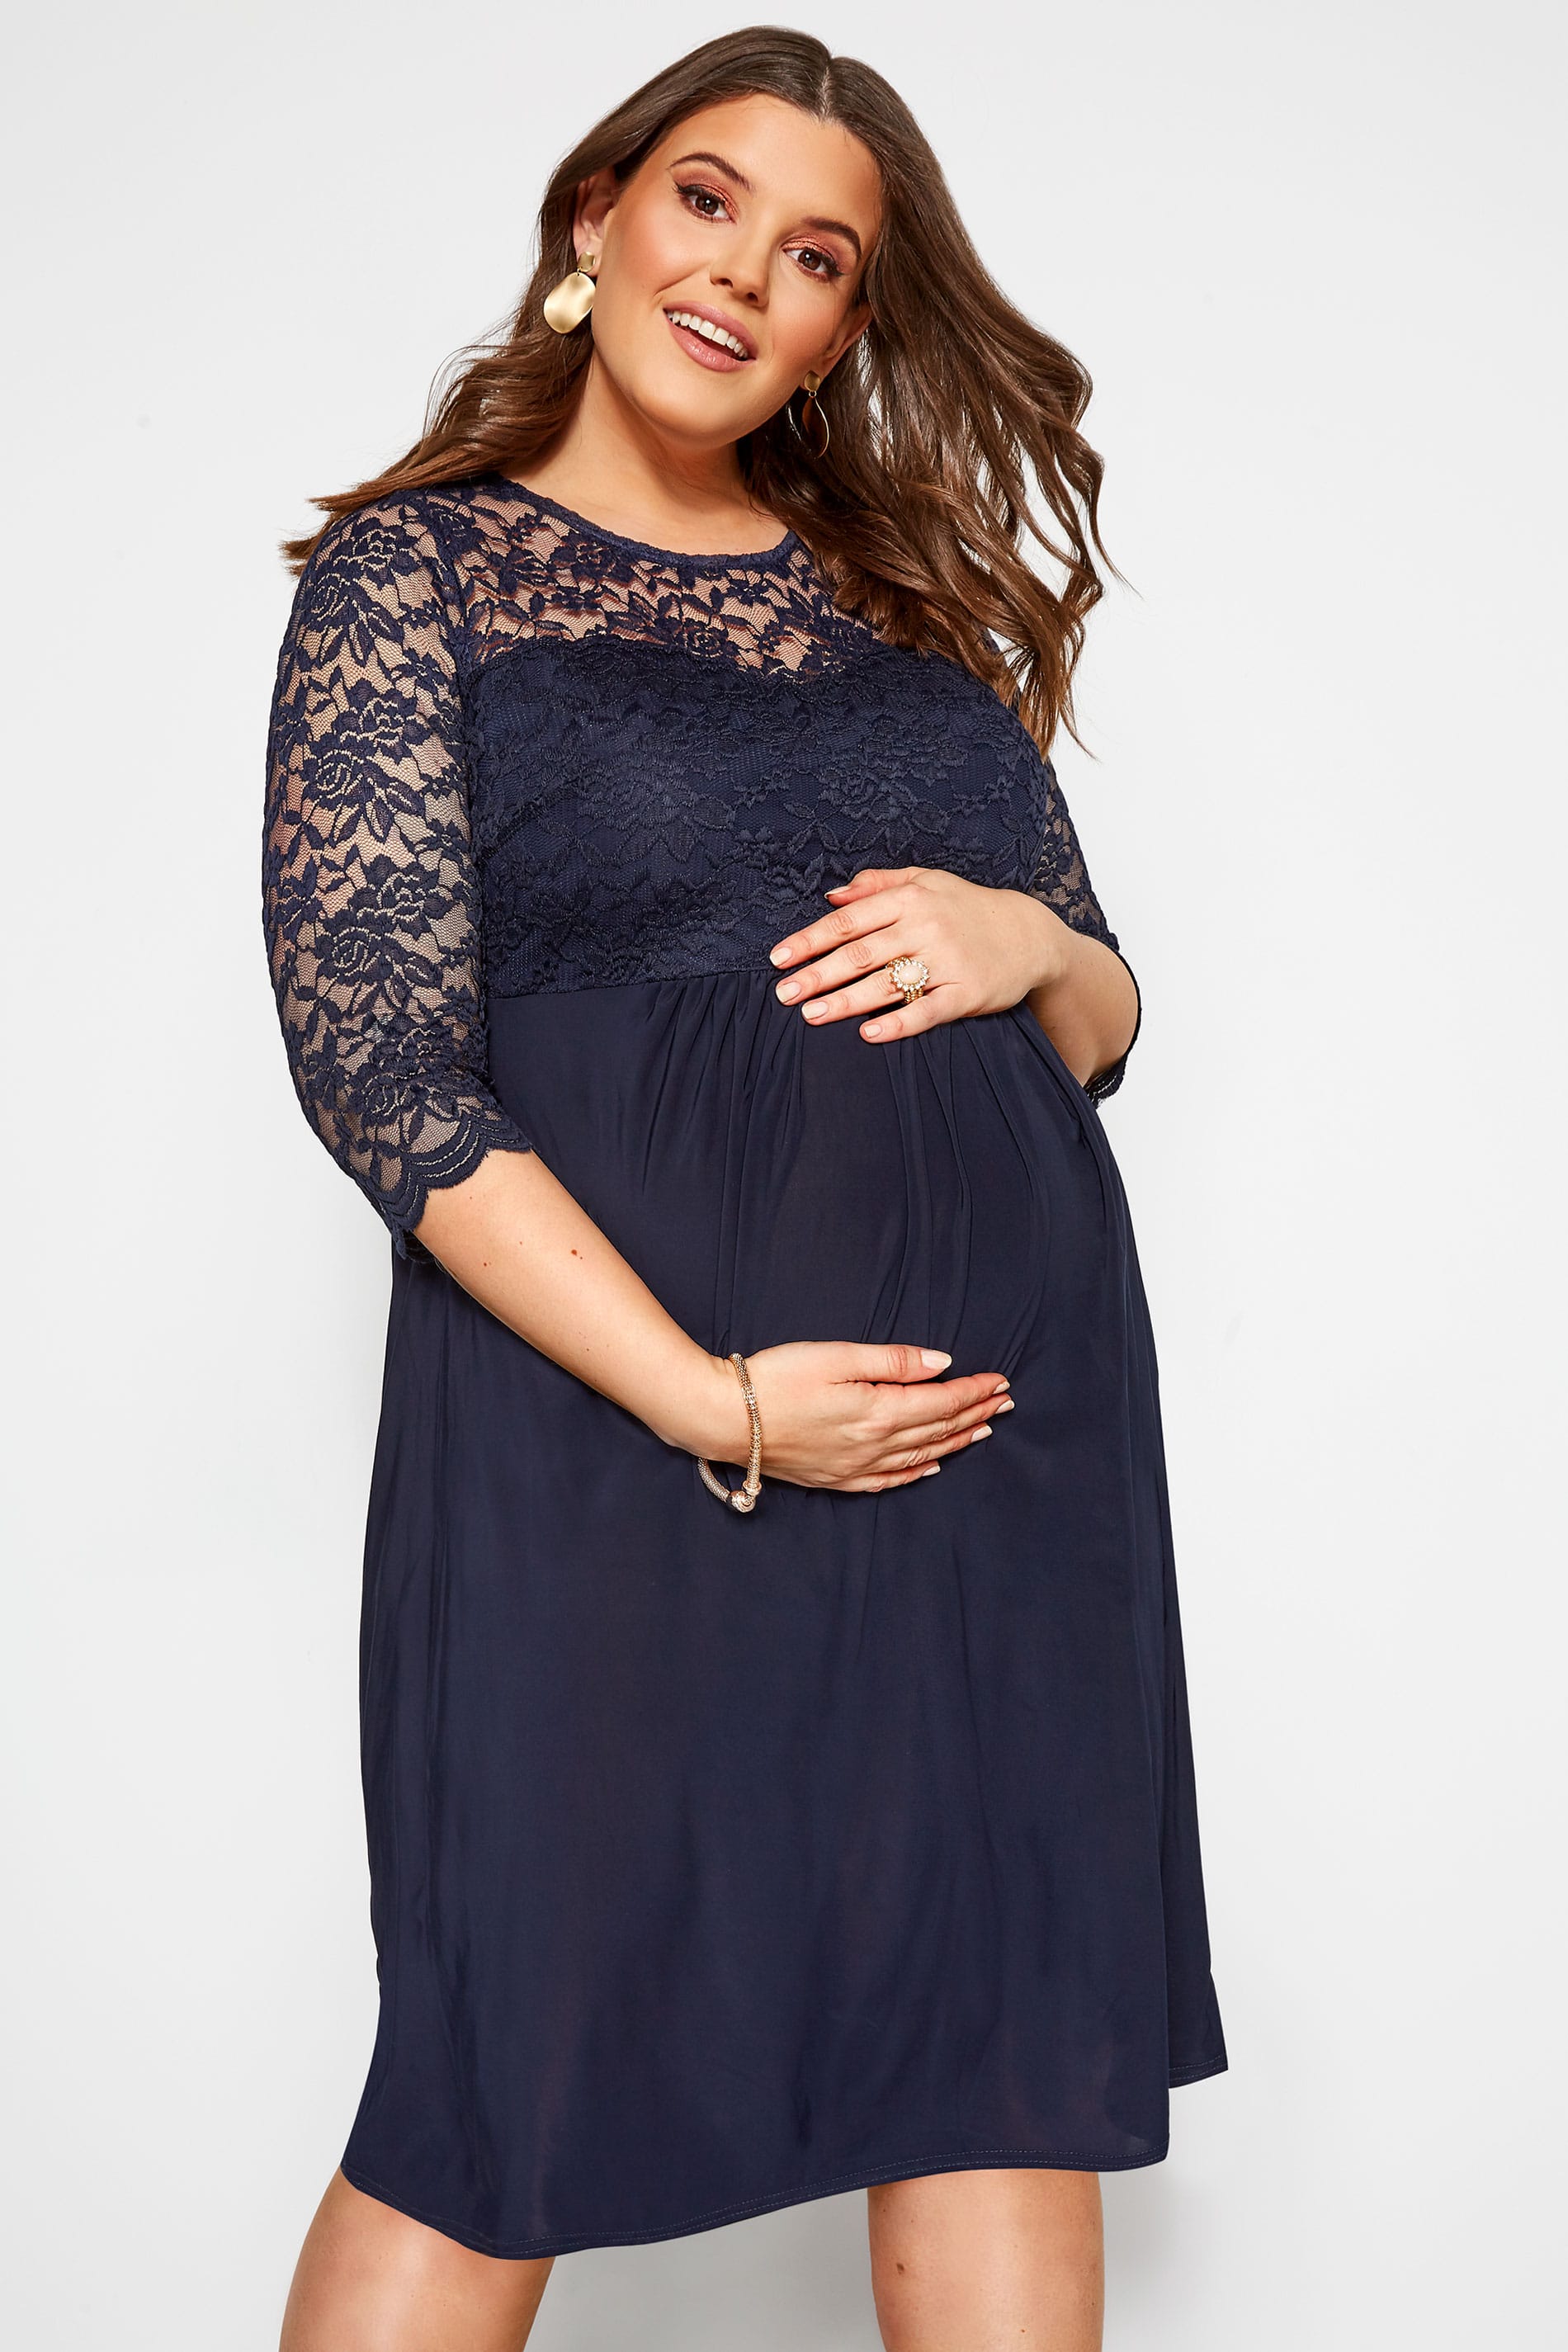 Yours Clothing Bump it up maternity navy lace midi dress